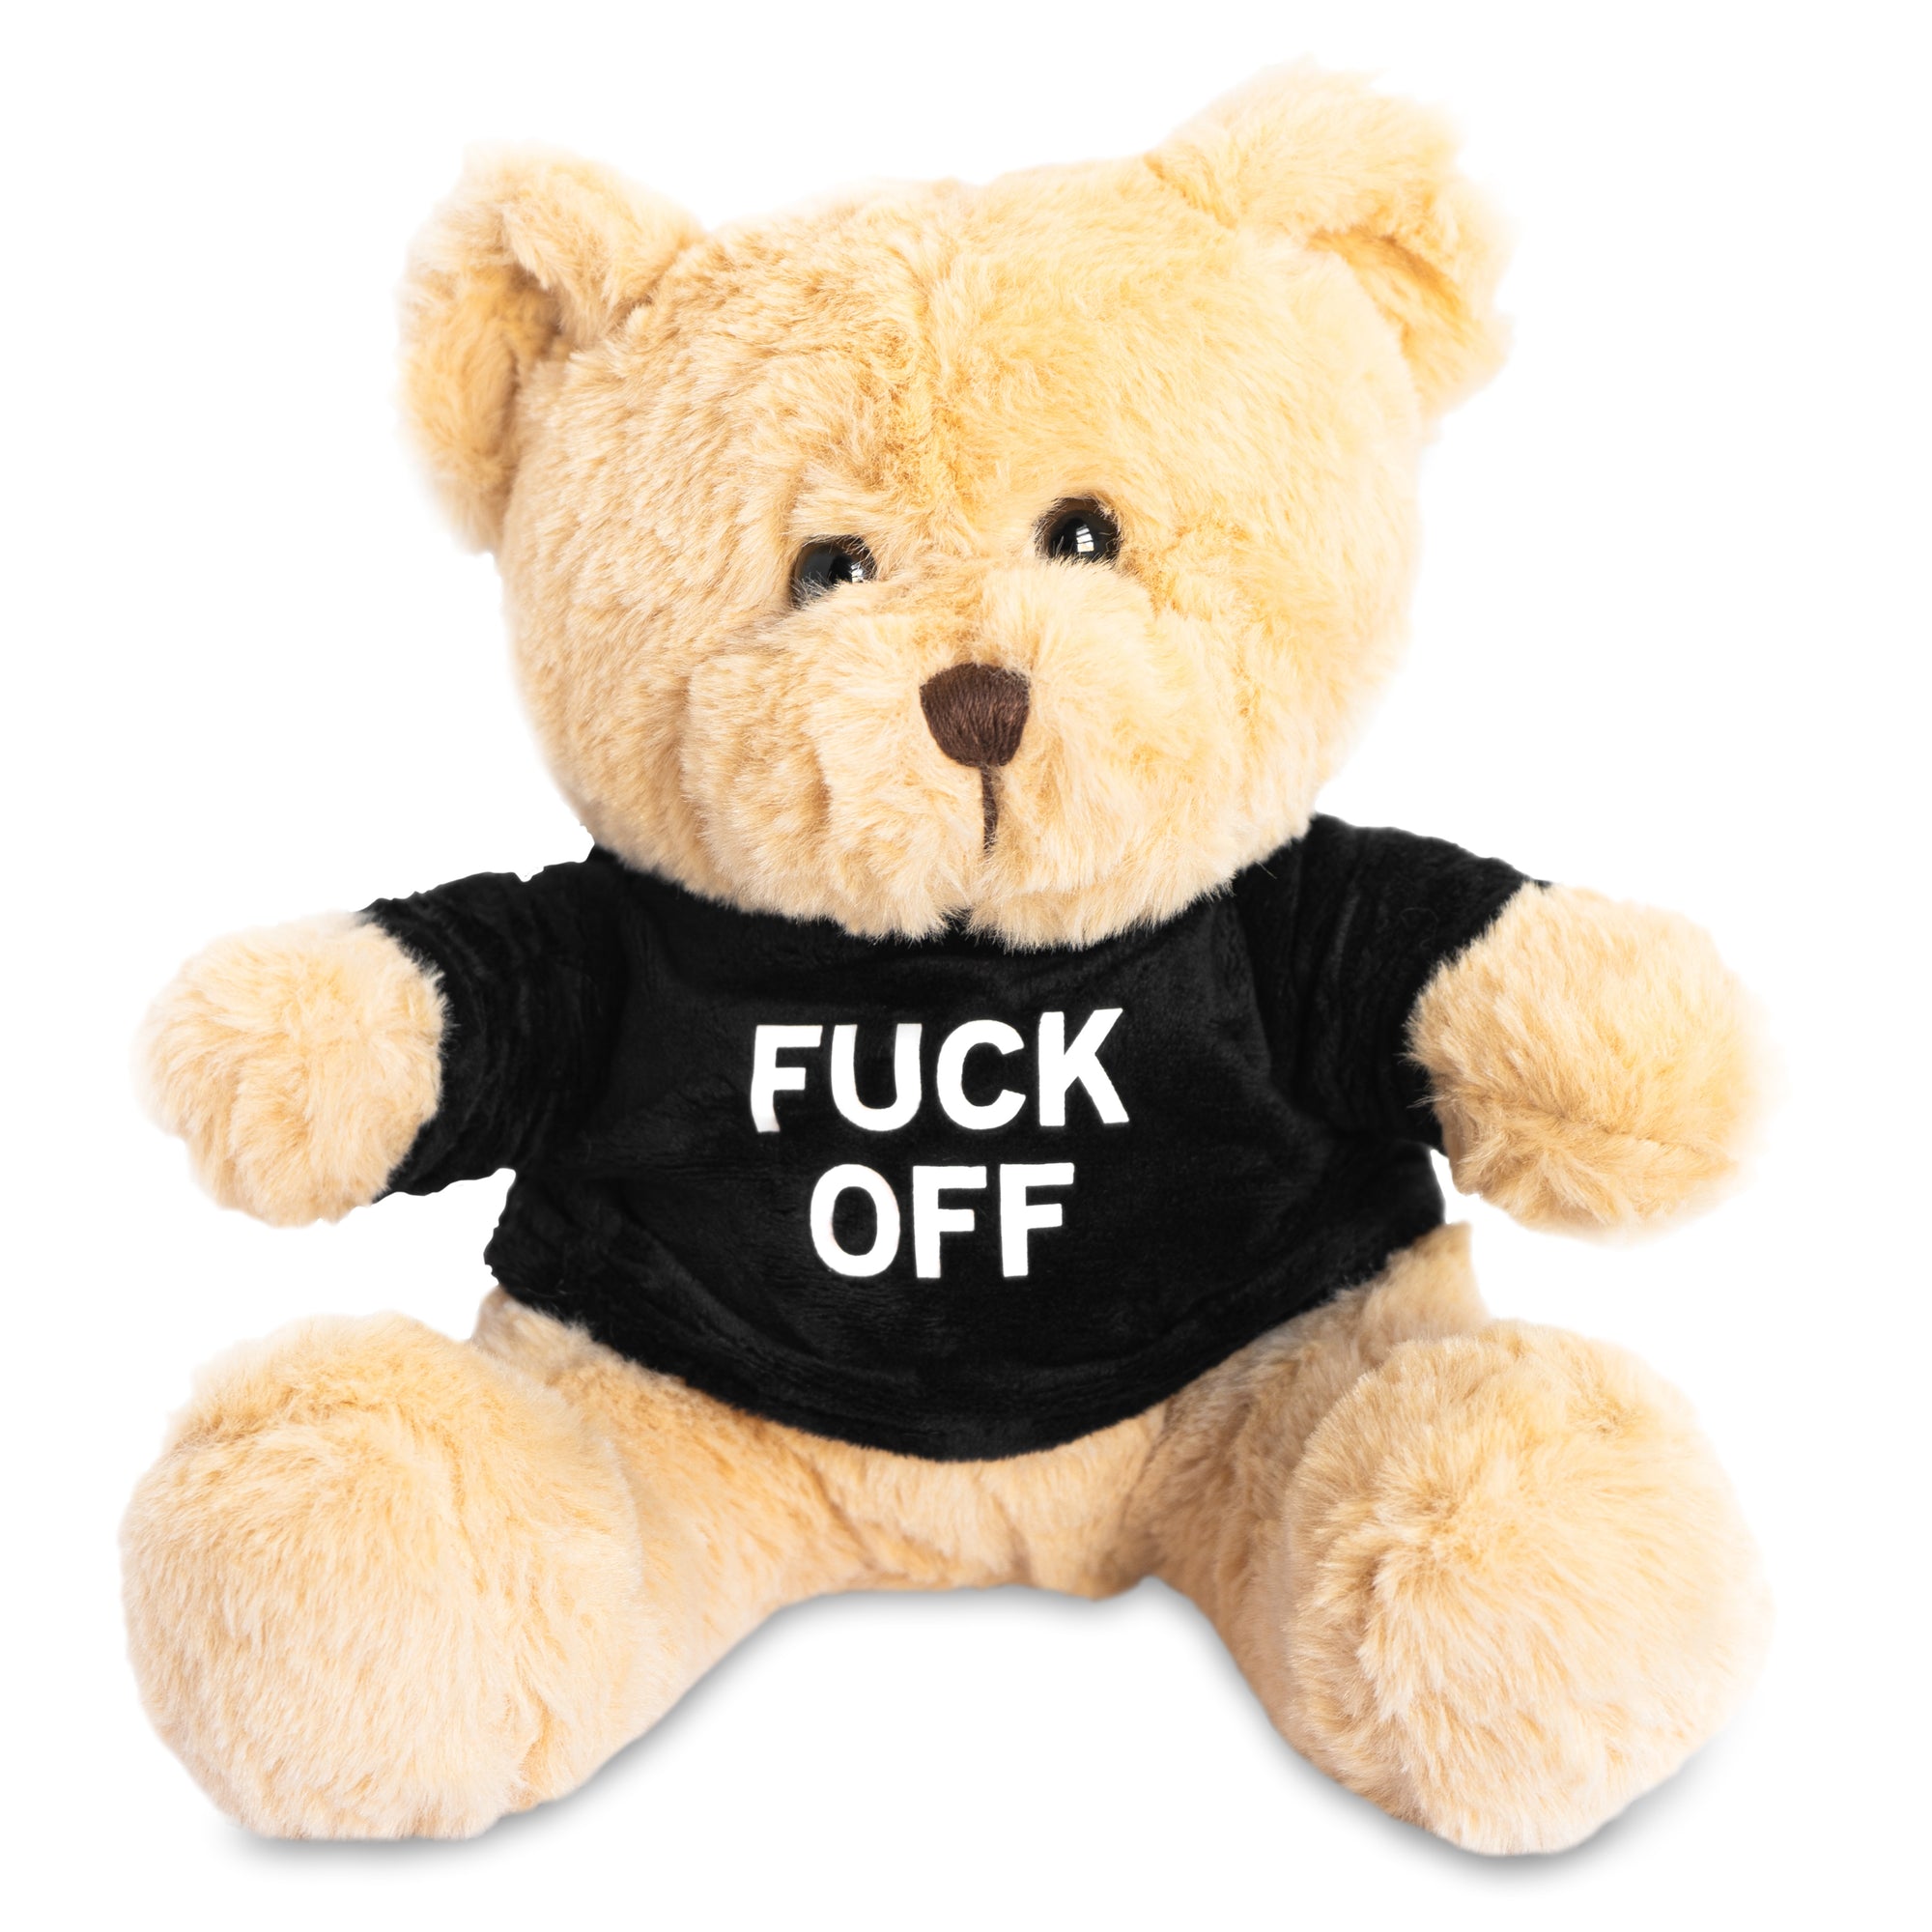 The "Friendly" Teddy Bear by No Fun®.  Plush toy bear is beige and wears a black shirt with the phrase "FUCK OFF" printed on the front.  Bear has a brown nose, and brown plastic eyes.